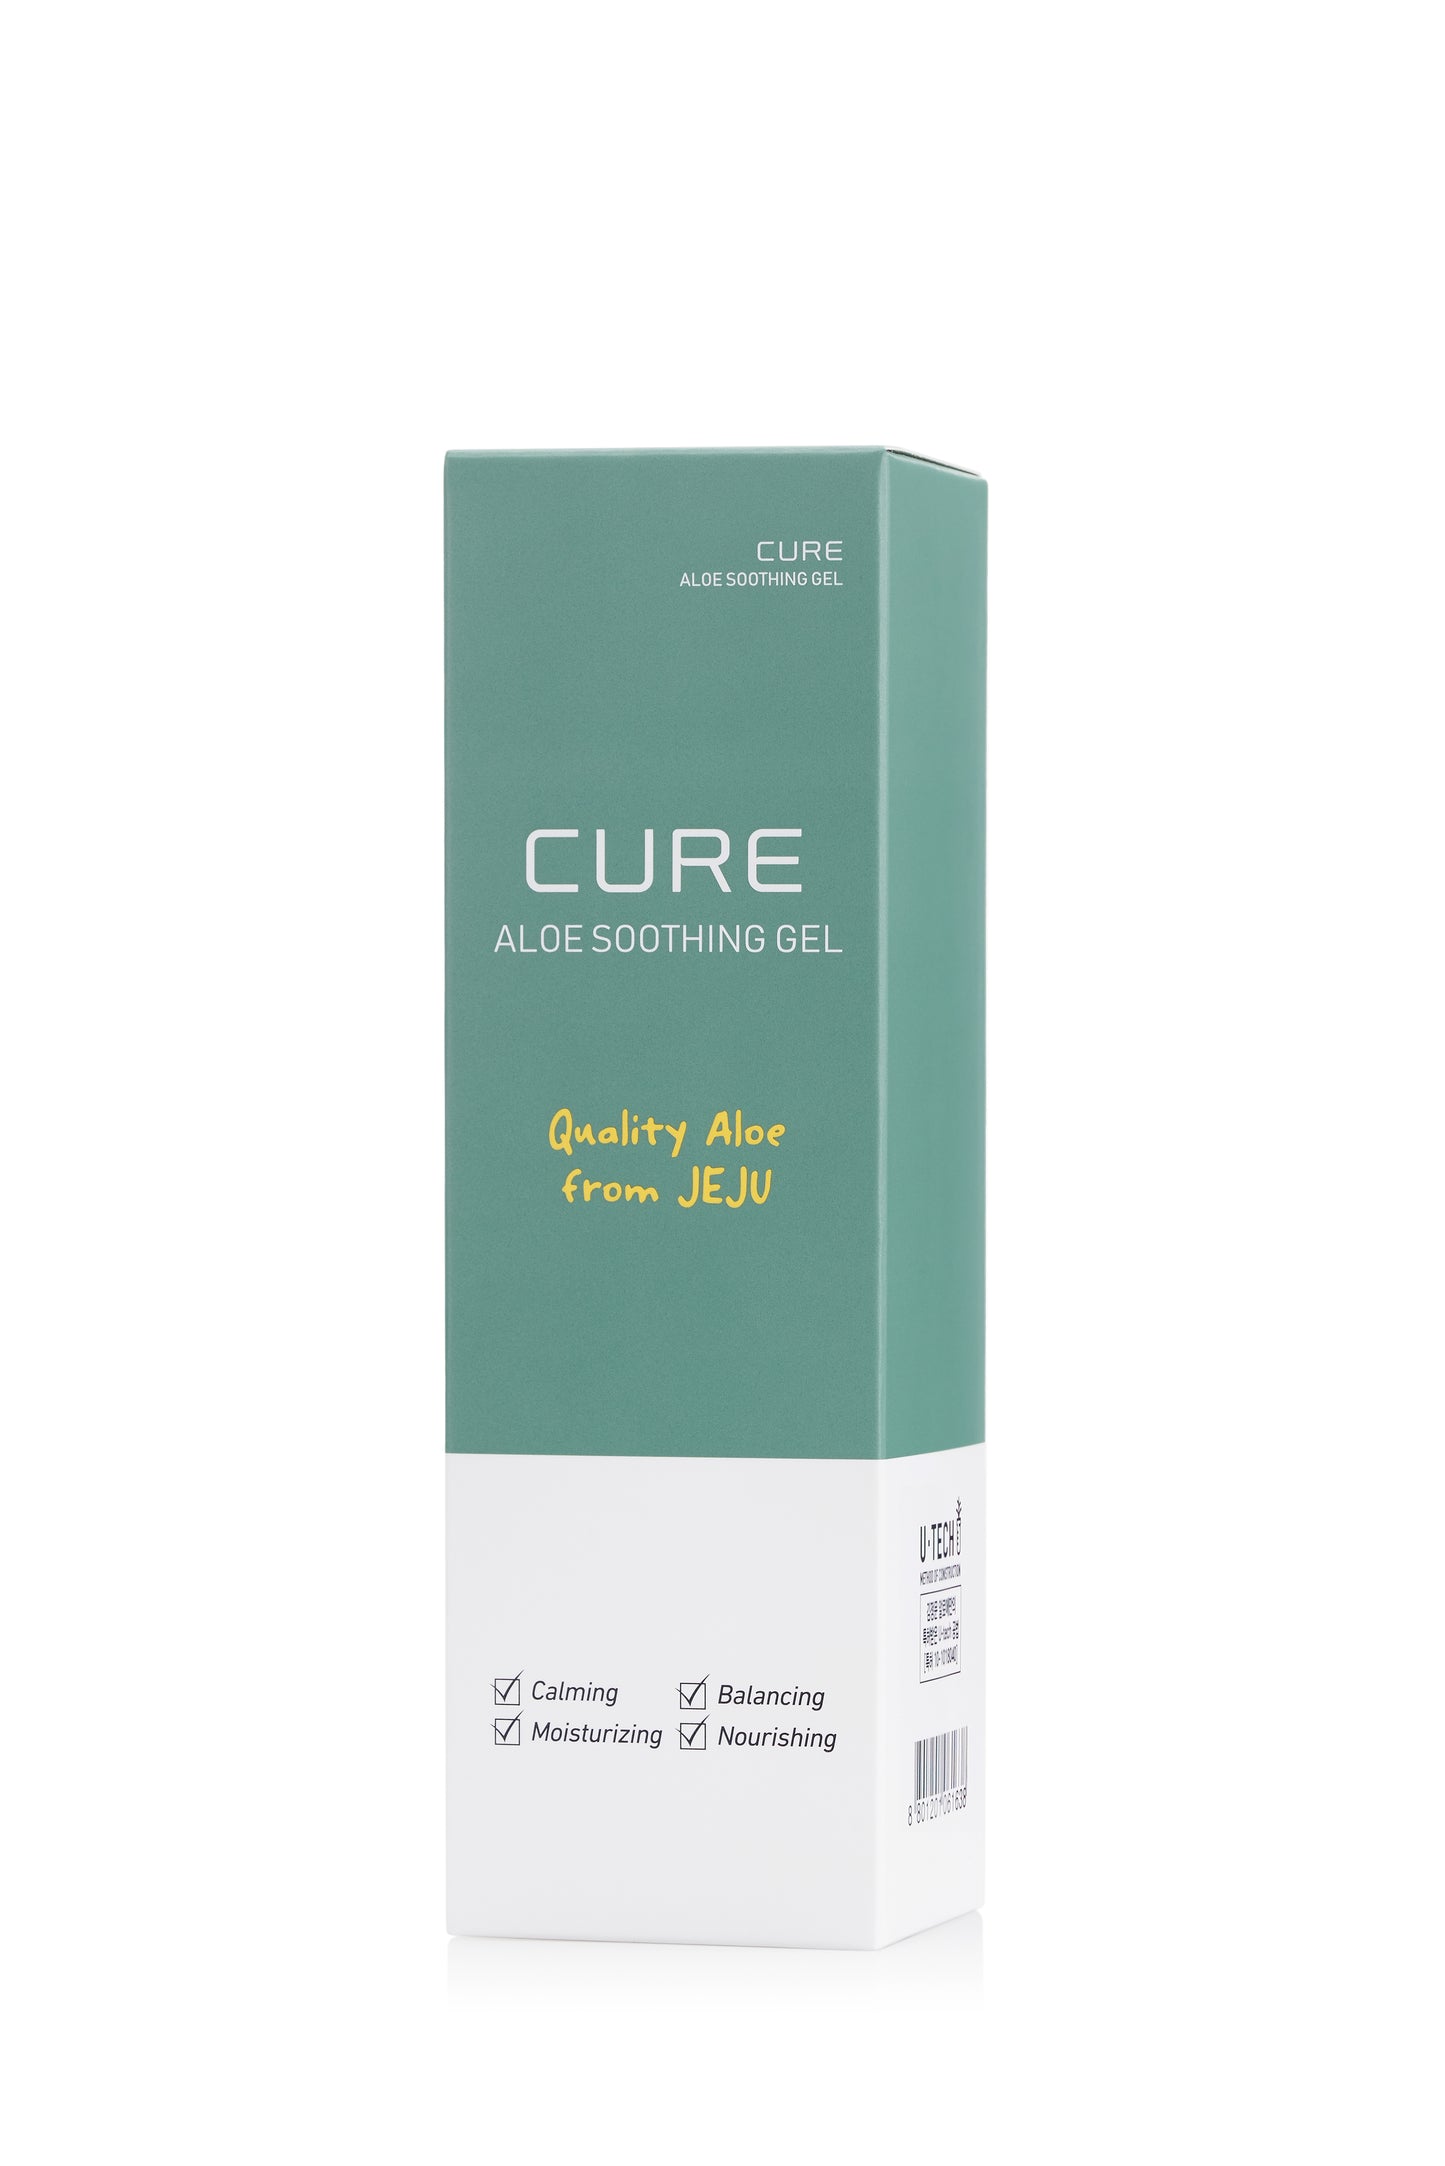 Cure soothing gel box image